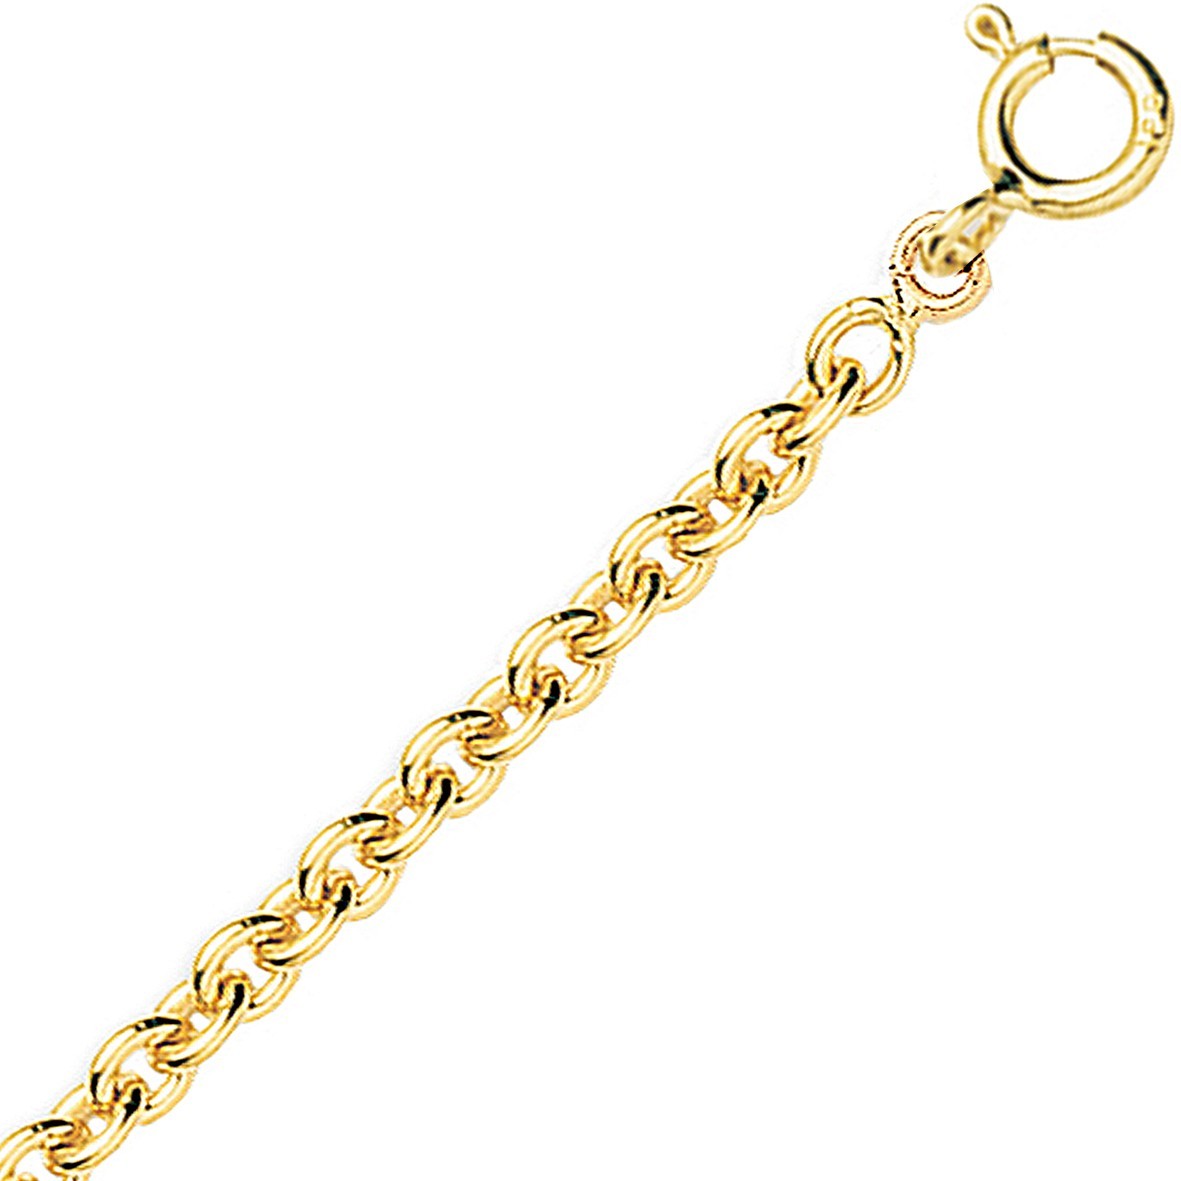 Chaine or jaune 18k maille forçat ronde 1,90mm